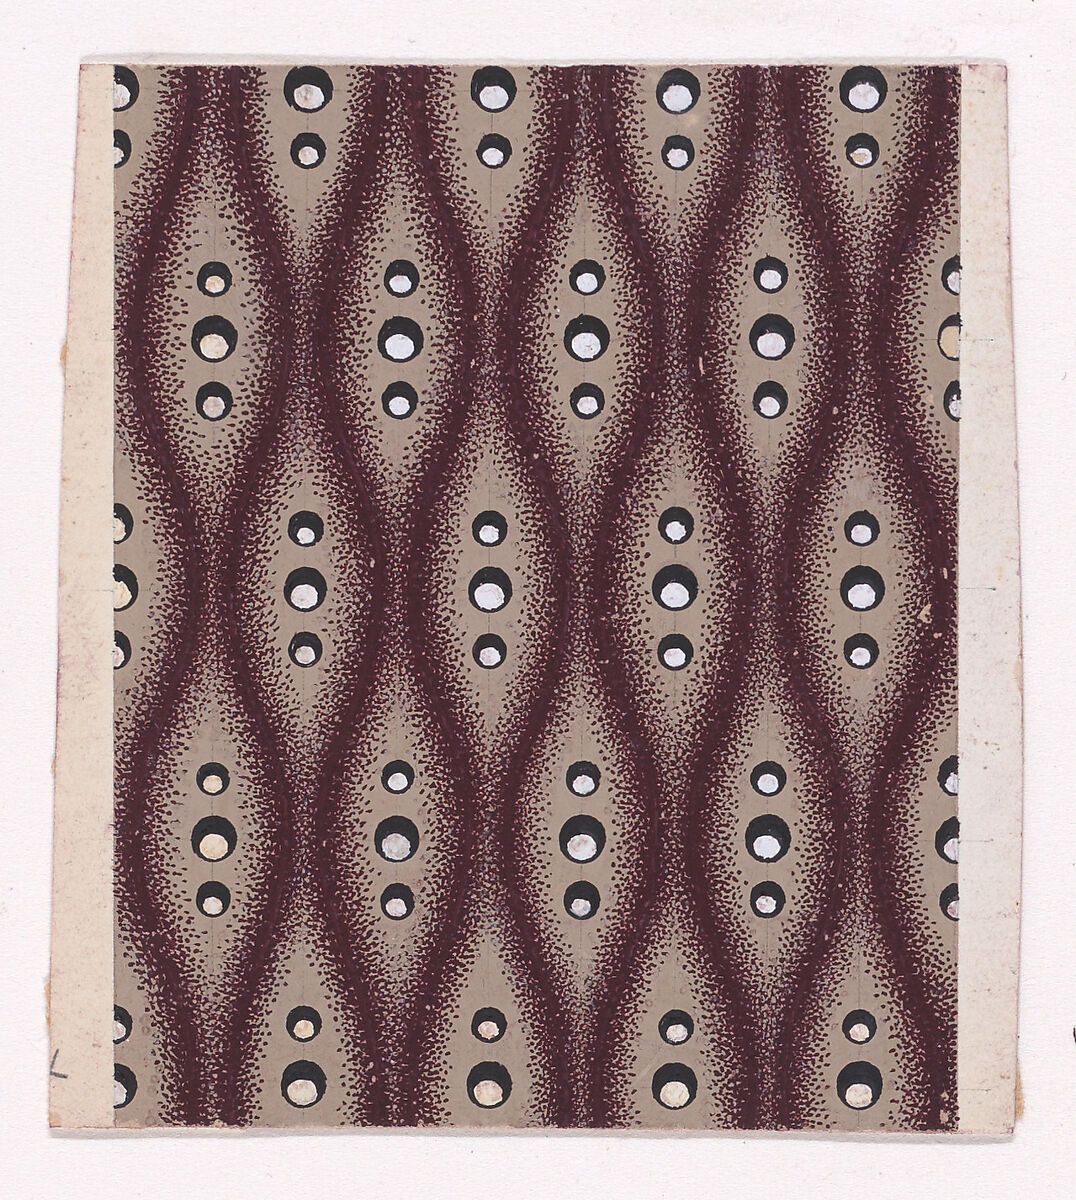 Textile Design with Alternating Strips of Groups of Three Pearls Framed by Undulating Stippled Garlands, Anonymous, Alsatian, 19th century, Gouache 